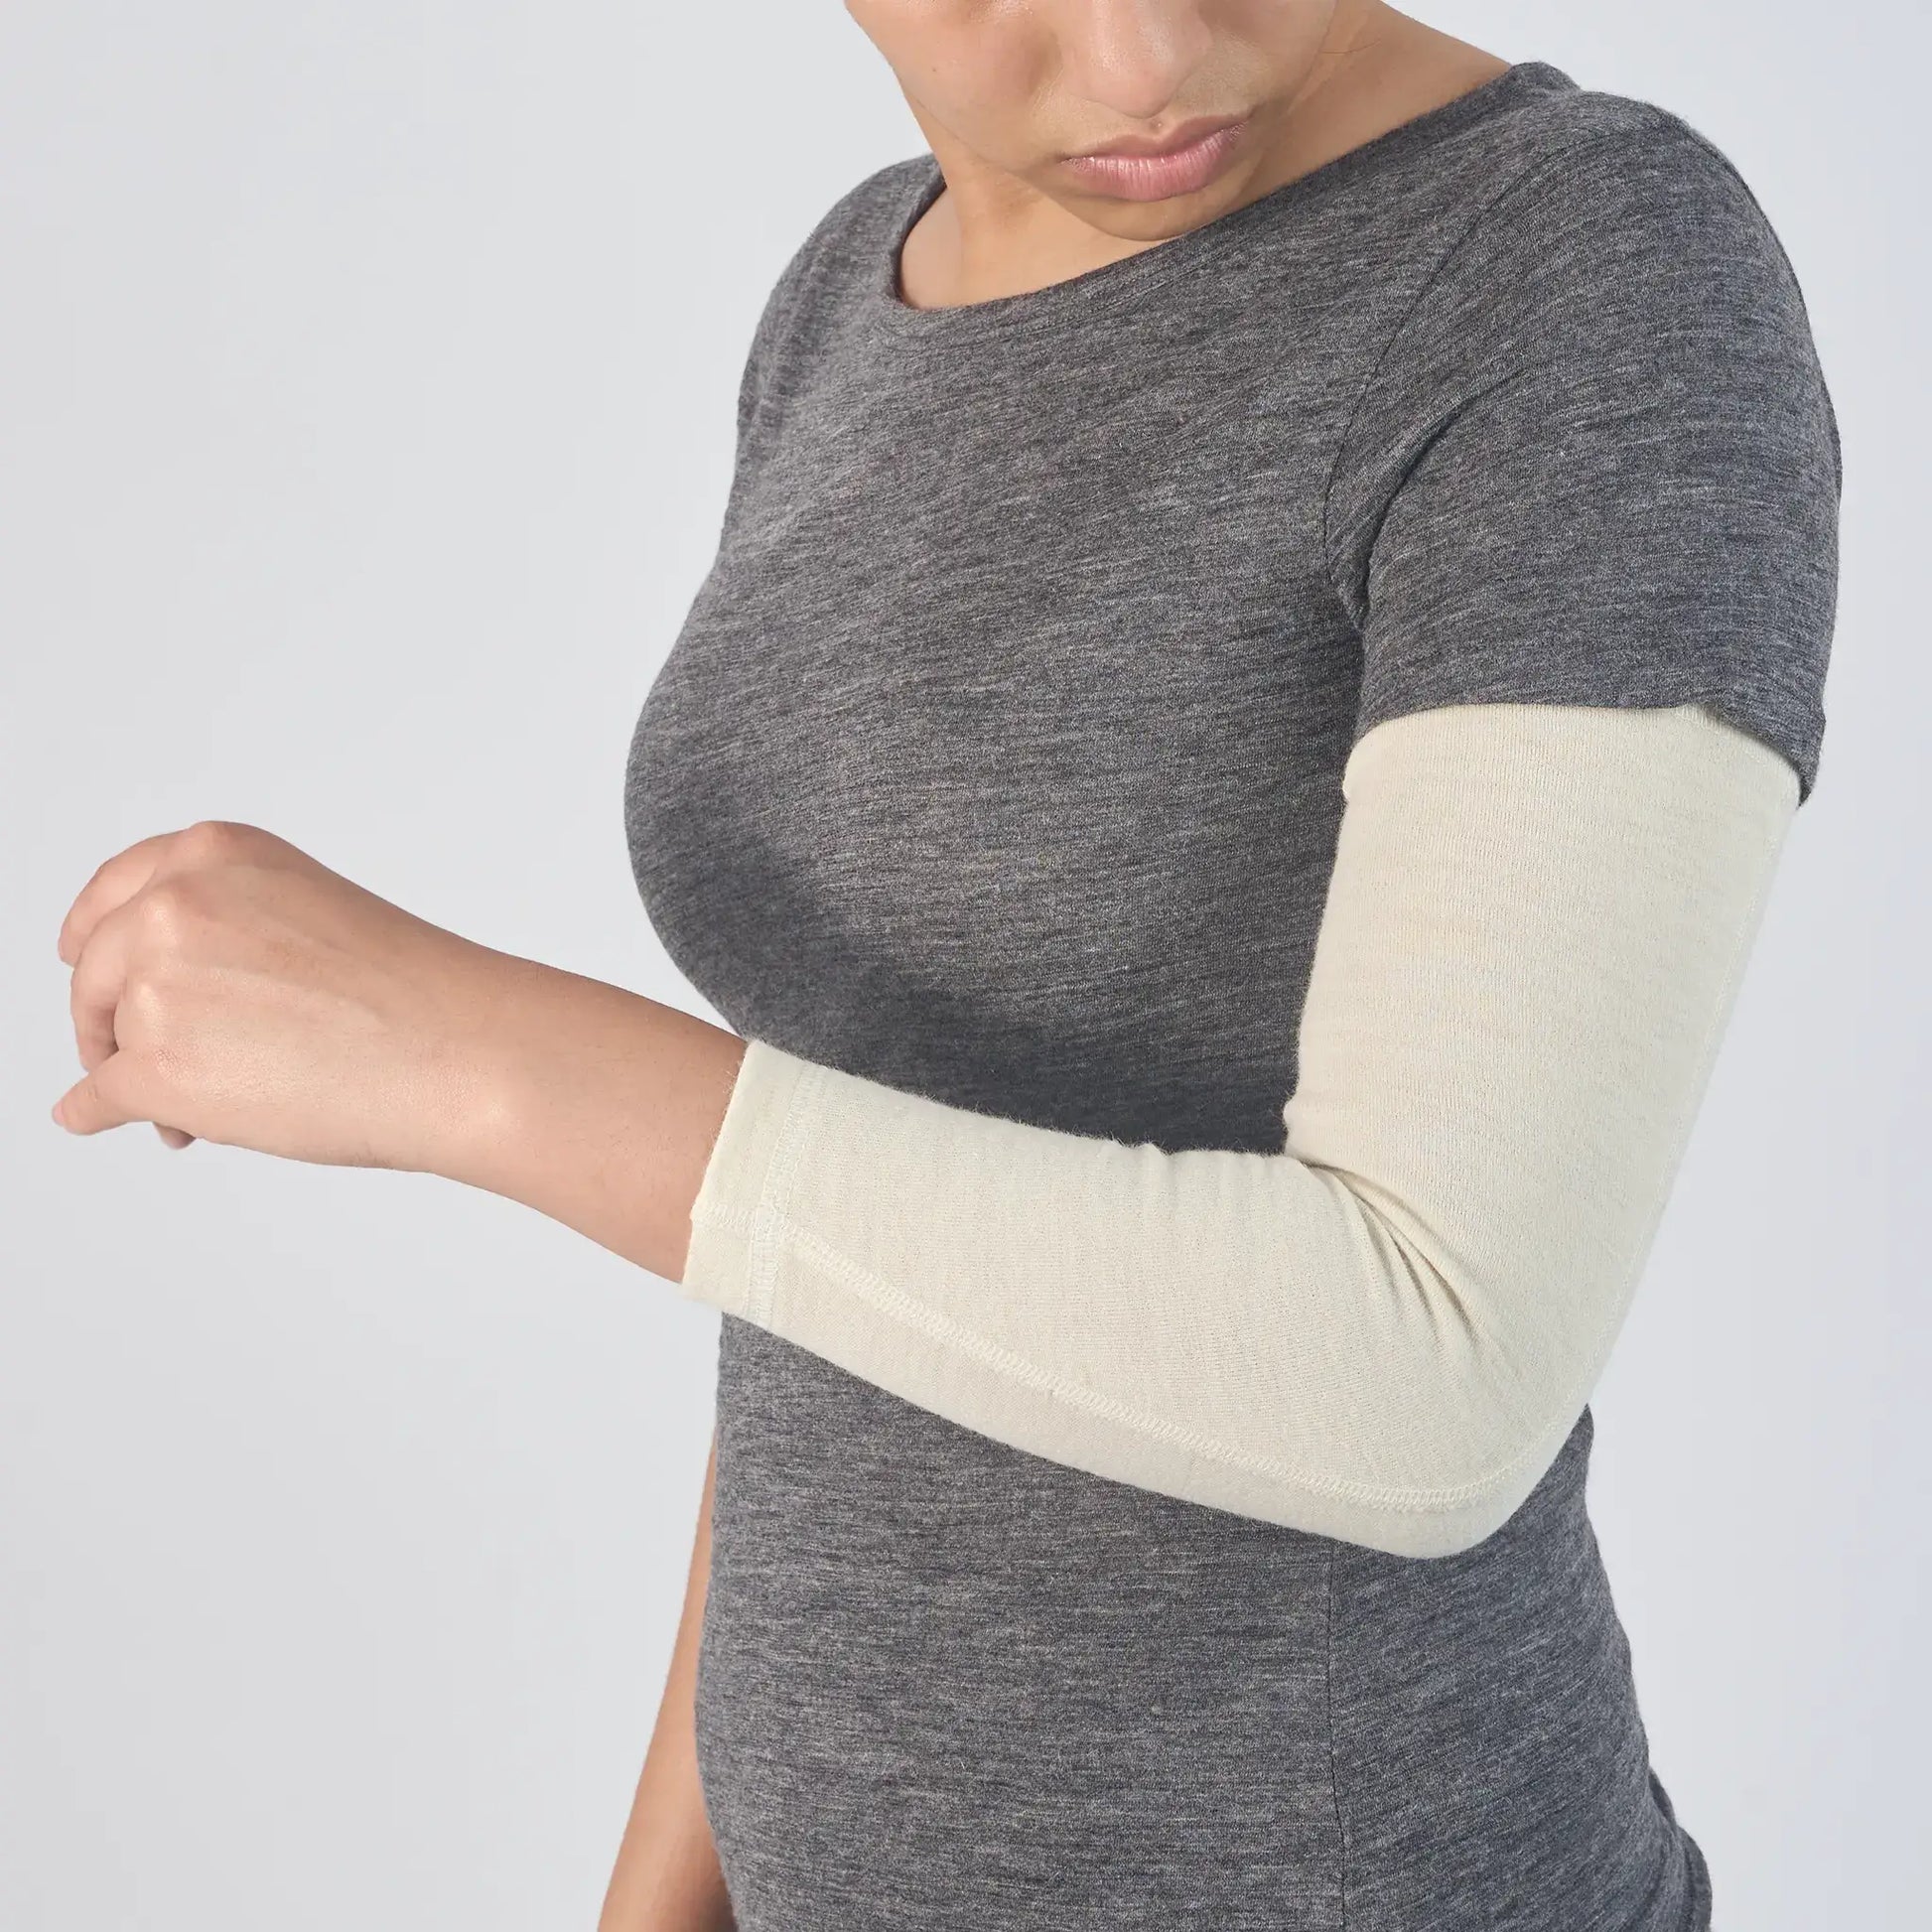 womens all natural sleeve lightweight color natural white